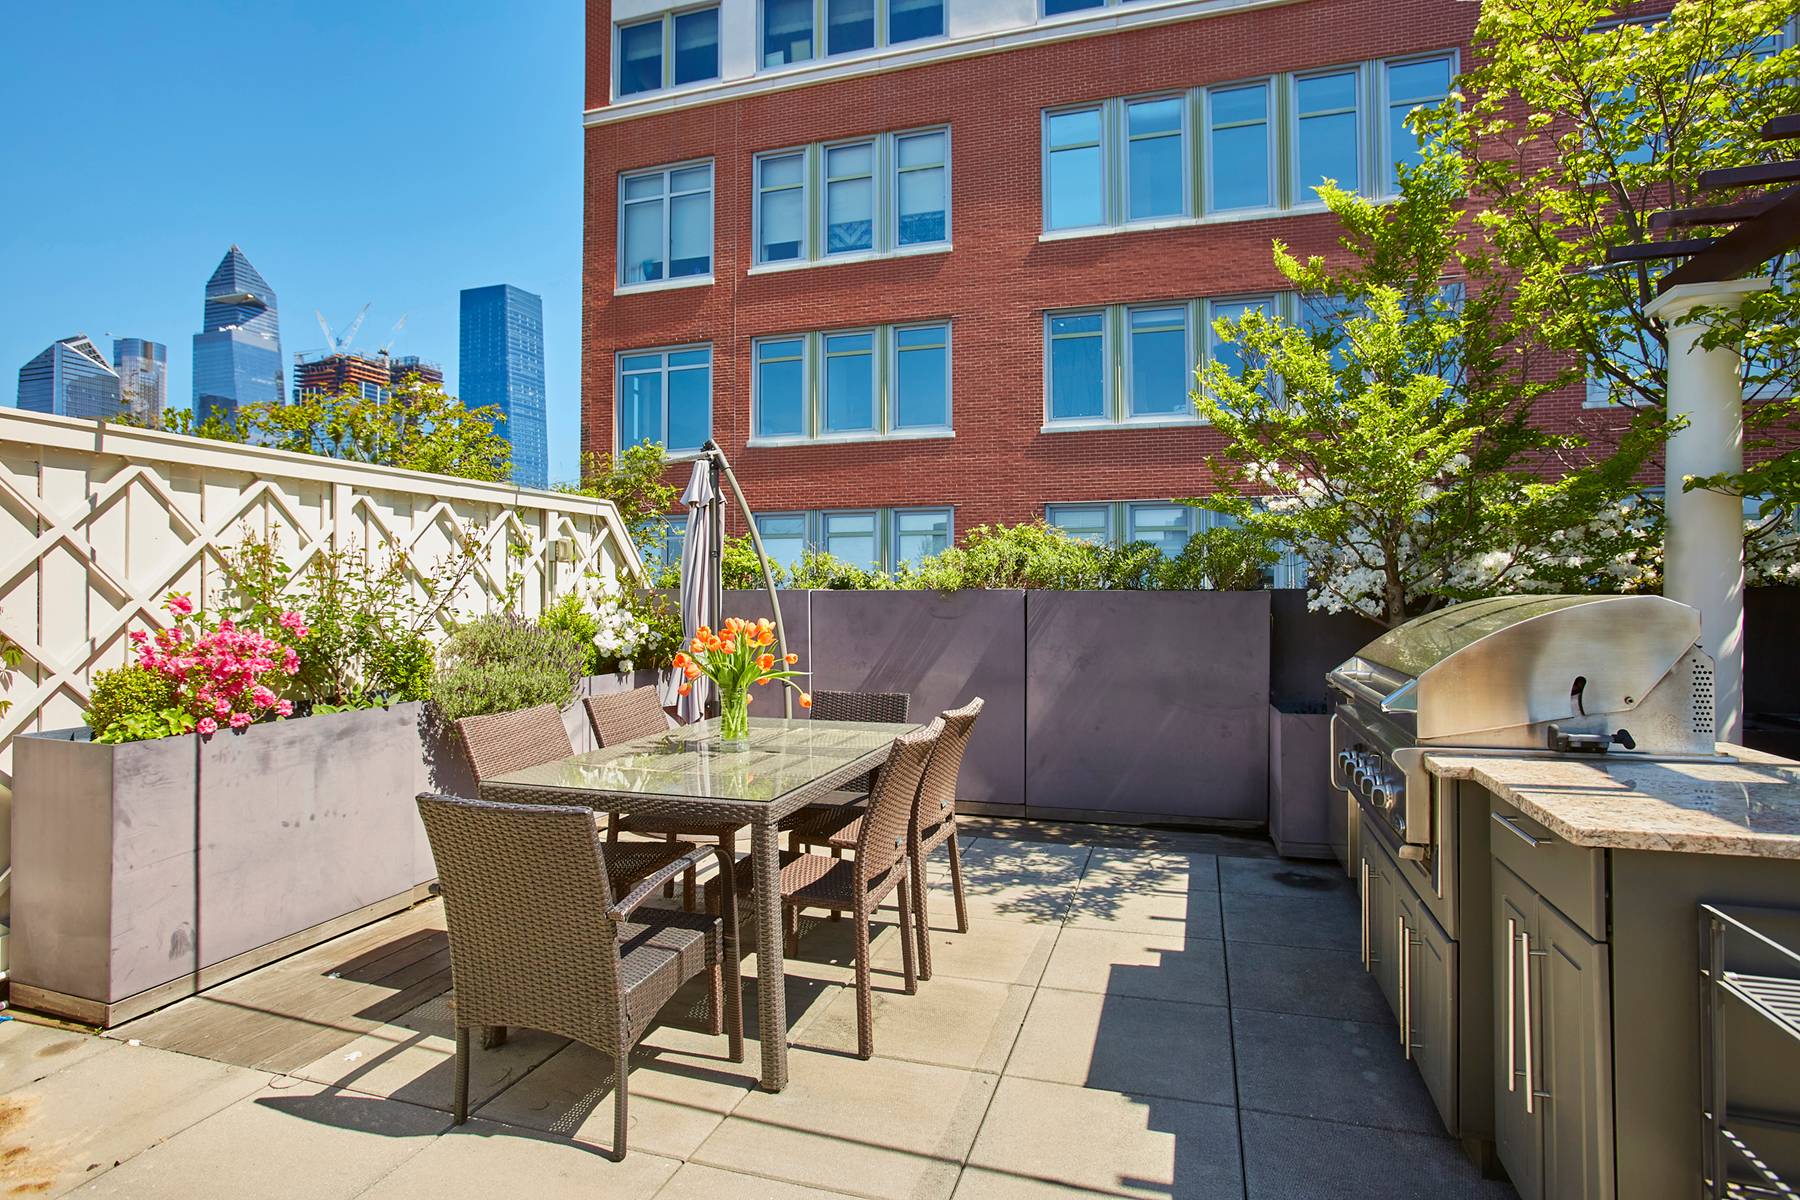 FABULOUS 2BR PH WITH PLANTED TERRACE OUTDOOR KITCHEN Summer in the City never looked so good.